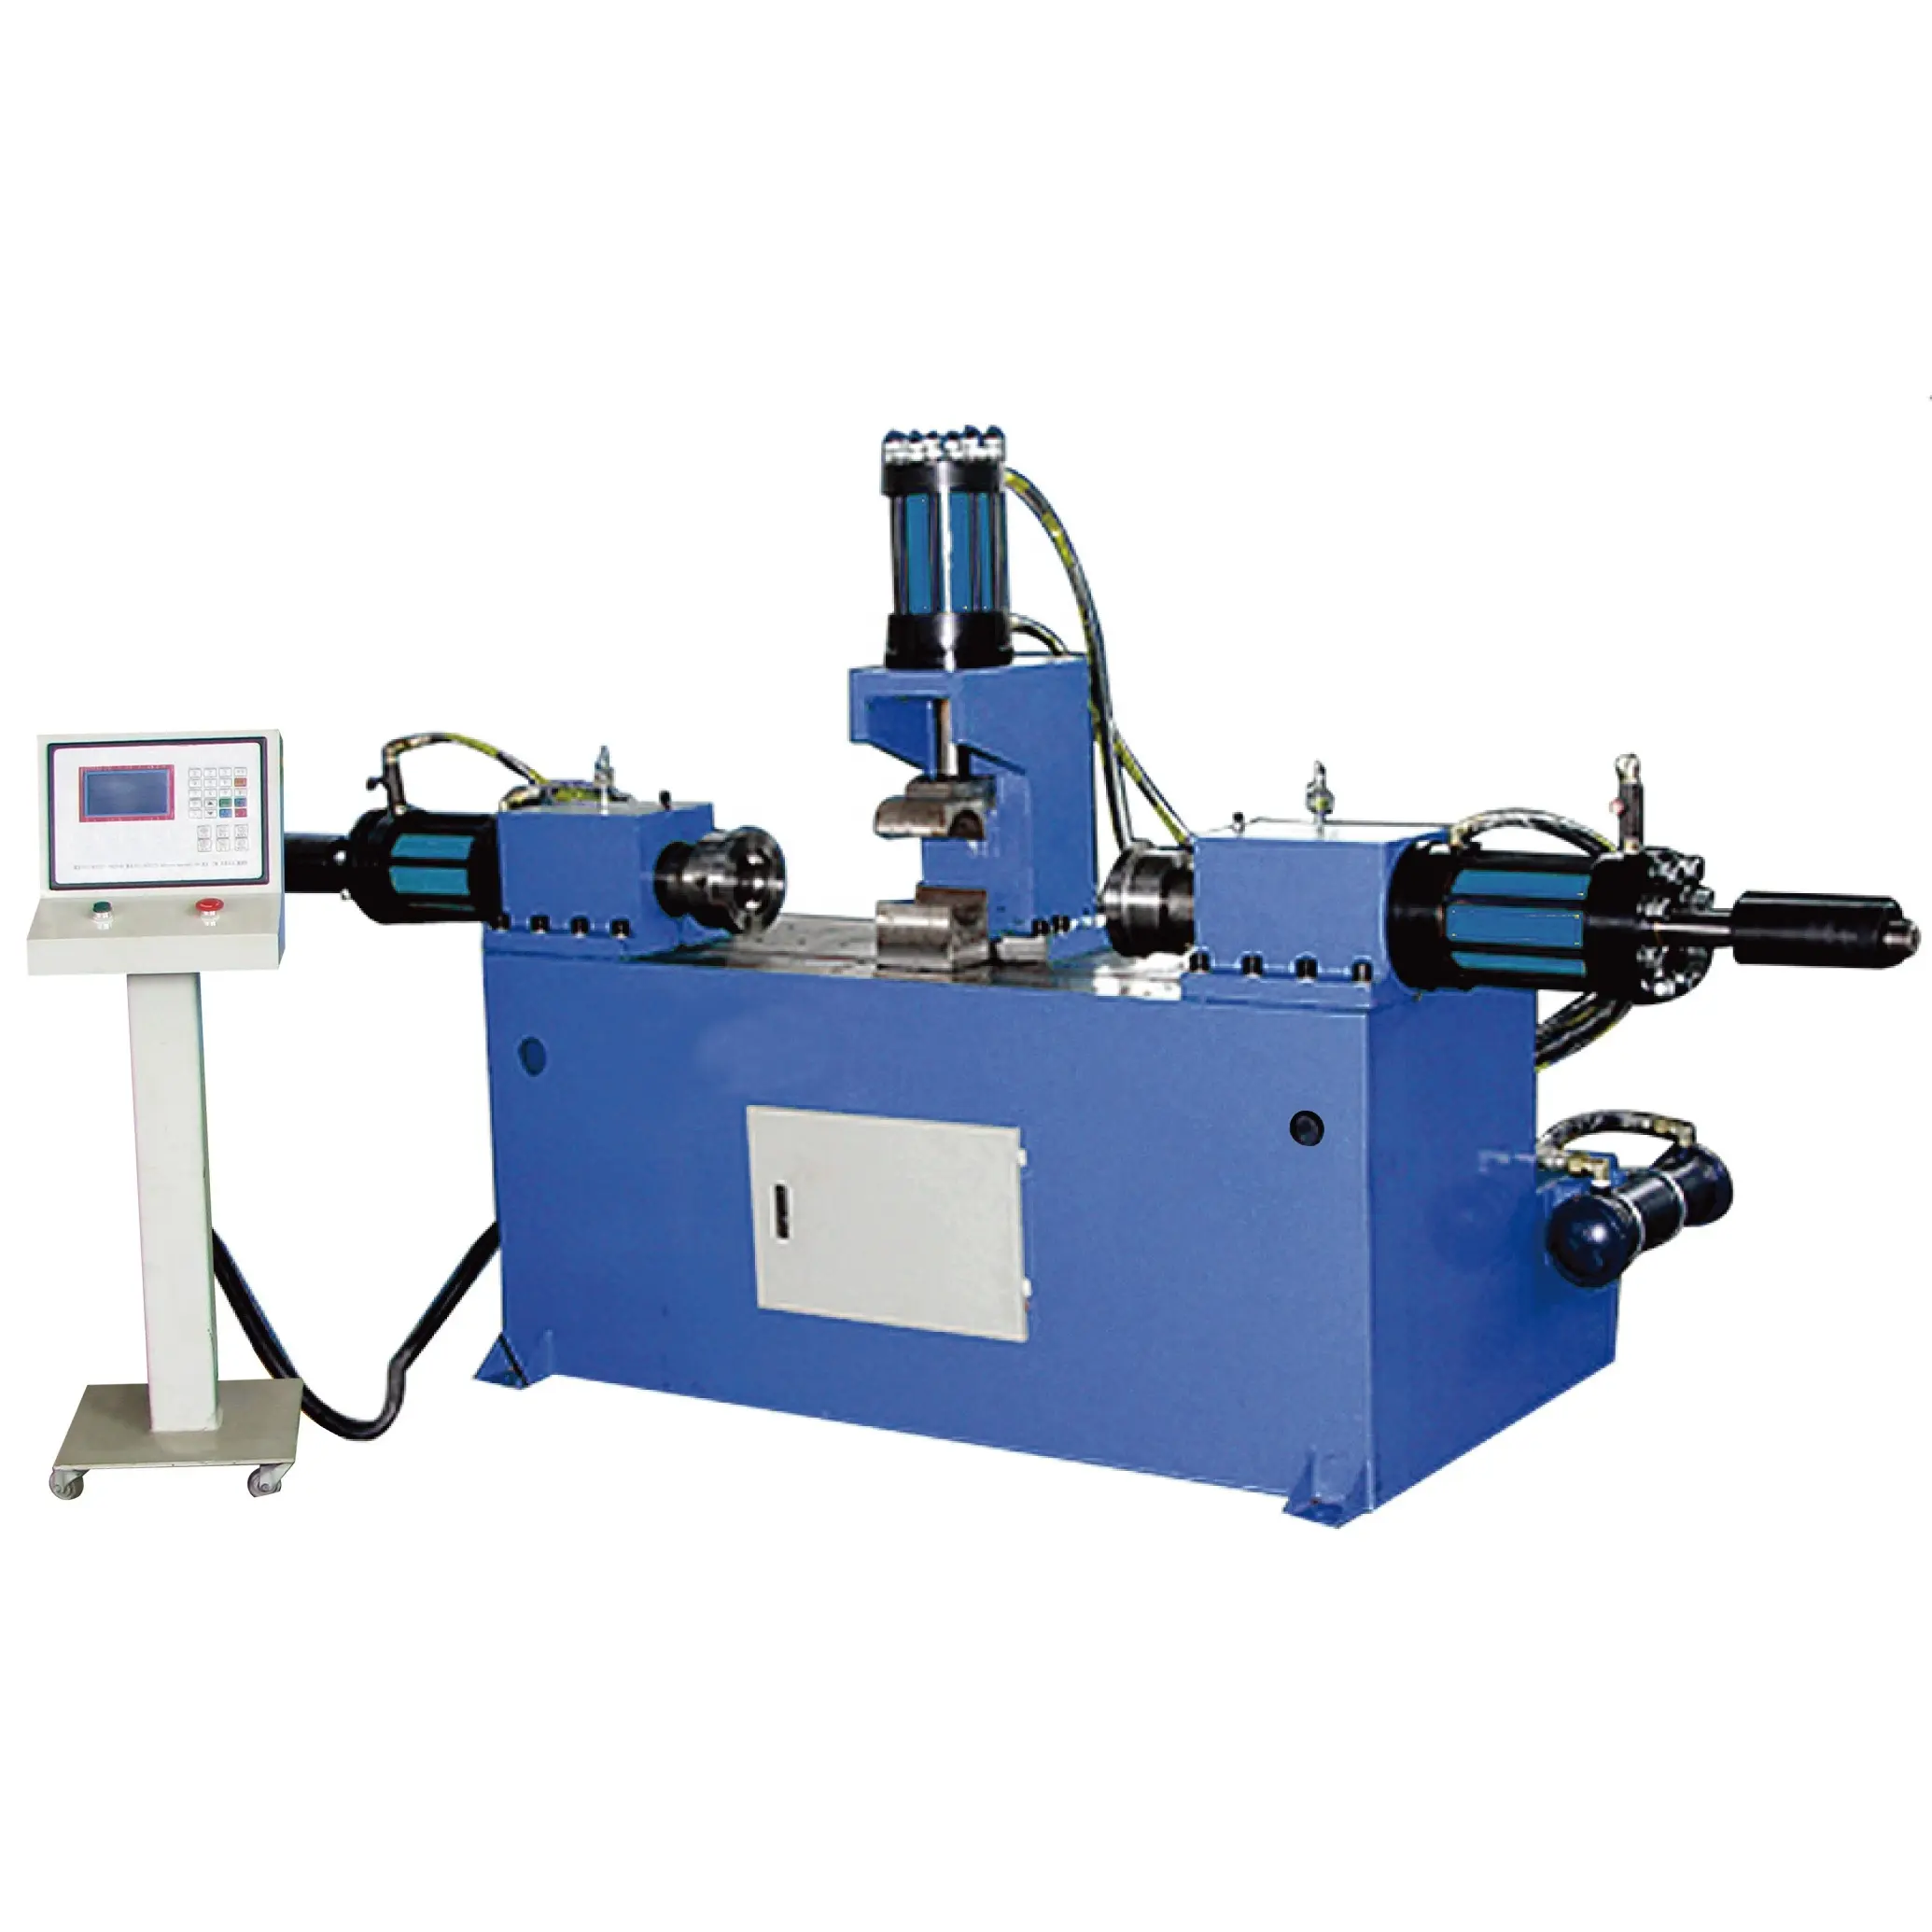 SM40NC taper pipe end forming machine pipe end forming machine tube end forming machine manufacturer supplier china